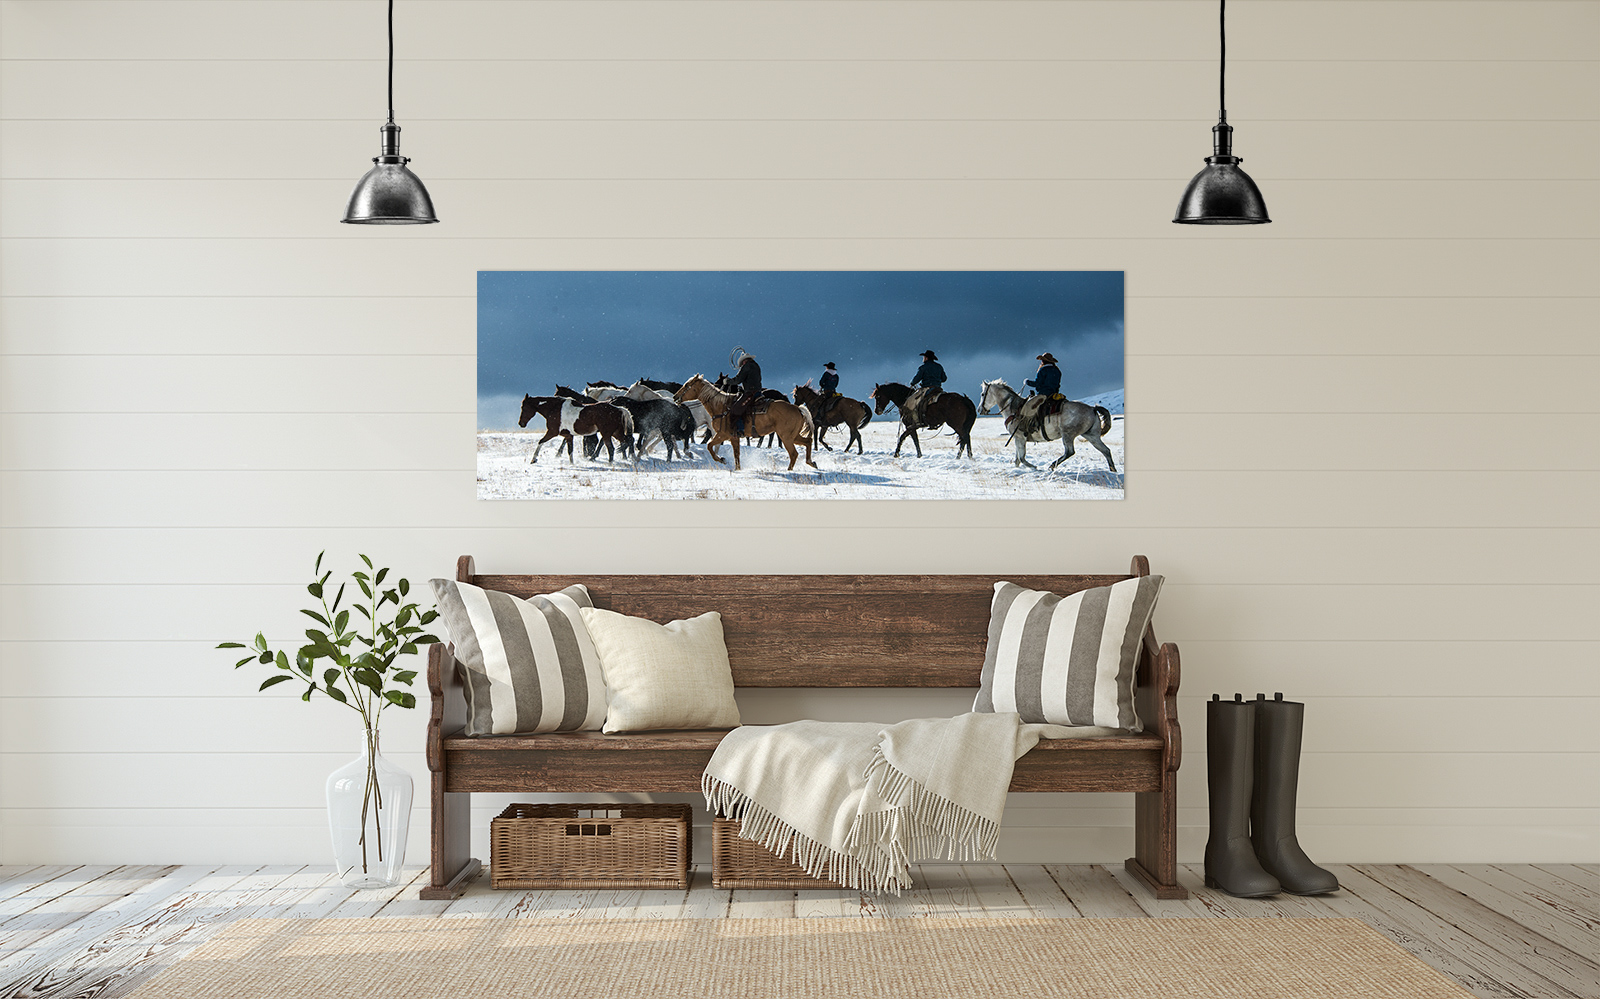 Cowboy Photography Prints. Pictures are available as Acrylic, Metal, Canvas, or Fine Art Paper limited edition wall art prints...